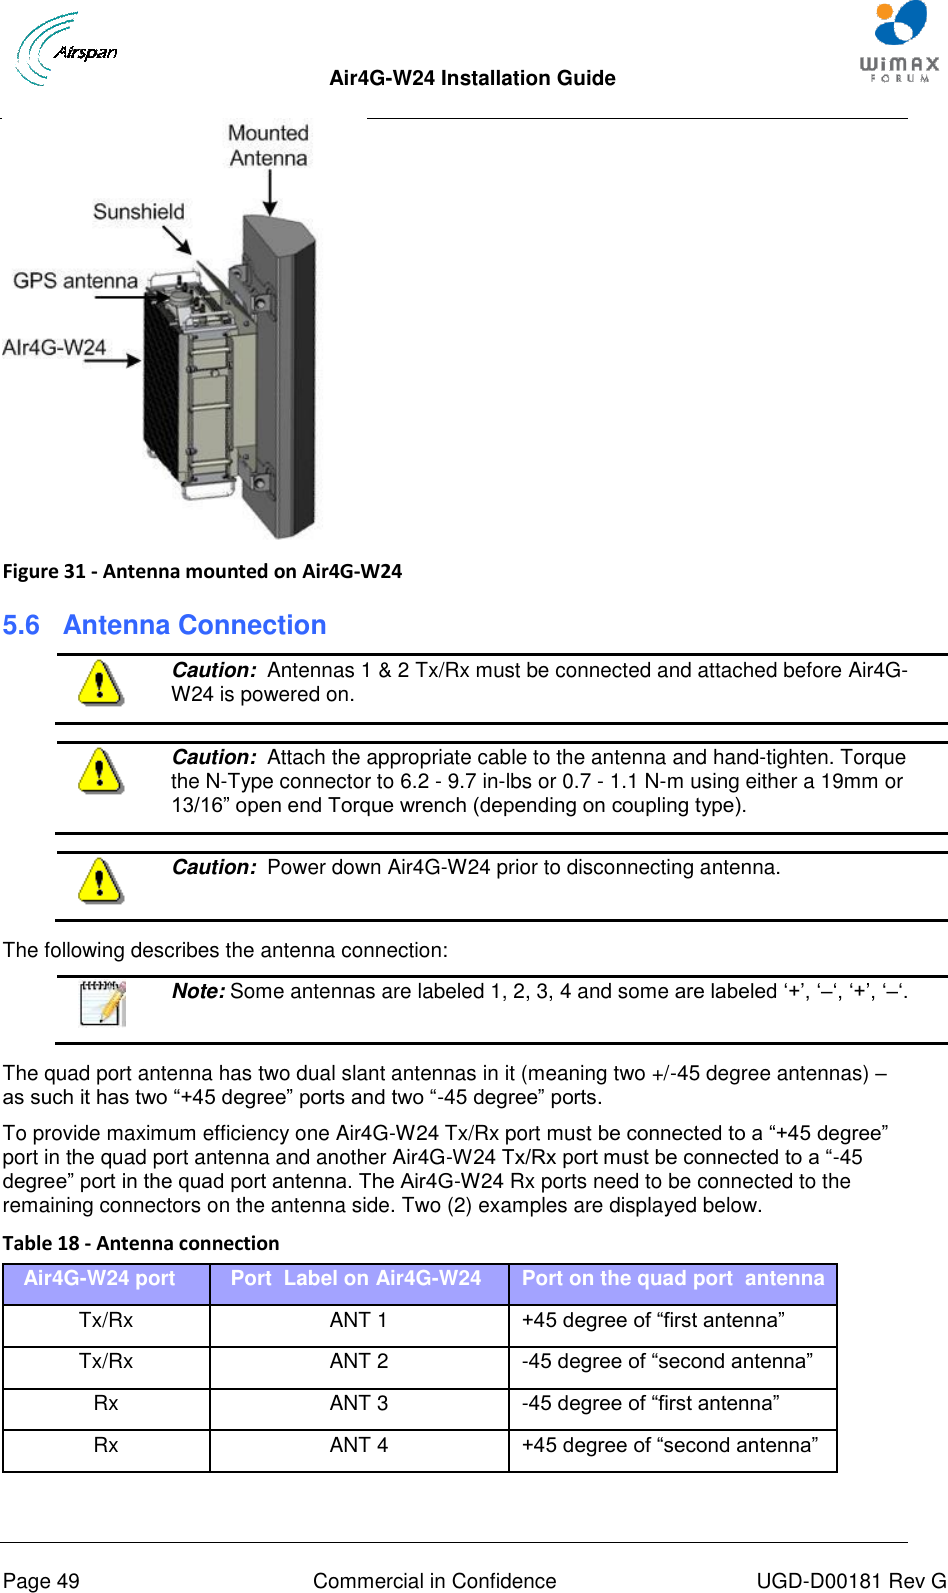  Air4G-W24 Installation Guide       Page 49  Commercial in Confidence  UGD-D00181 Rev G  Figure 31 - Antenna mounted on Air4G-W24 5.6  Antenna Connection  Caution:  Antennas 1 &amp; 2 Tx/Rx must be connected and attached before Air4G-W24 is powered on.   Caution:  Attach the appropriate cable to the antenna and hand-tighten. Torque the N-Type connector to 6.2 - 9.7 in-lbs or 0.7 - 1.1 N-m using either a 19mm or 13/16” open end Torque wrench (depending on coupling type).   Caution:  Power down Air4G-W24 prior to disconnecting antenna.   The following describes the antenna connection:   Note: Some antennas are labeled 1, 2, 3, 4 and some are labeled „+‟, „–„, „+‟, „–„.  The quad port antenna has two dual slant antennas in it (meaning two +/-45 degree antennas) – as such it has two “+45 degree” ports and two “-45 degree” ports.  To provide maximum efficiency one Air4G-W24 Tx/Rx port must be connected to a “+45 degree” port in the quad port antenna and another Air4G-W24 Tx/Rx port must be connected to a “-45 degree” port in the quad port antenna. The Air4G-W24 Rx ports need to be connected to the remaining connectors on the antenna side. Two (2) examples are displayed below. Table 18 - Antenna connection Air4G-W24 port Port  Label on Air4G-W24   Port on the quad port  antenna Tx/Rx ANT 1   +45 degree of “first antenna” Tx/Rx ANT 2   -45 degree of “second antenna” Rx ANT 3   -45 degree of “first antenna” Rx ANT 4   +45 degree of “second antenna”  